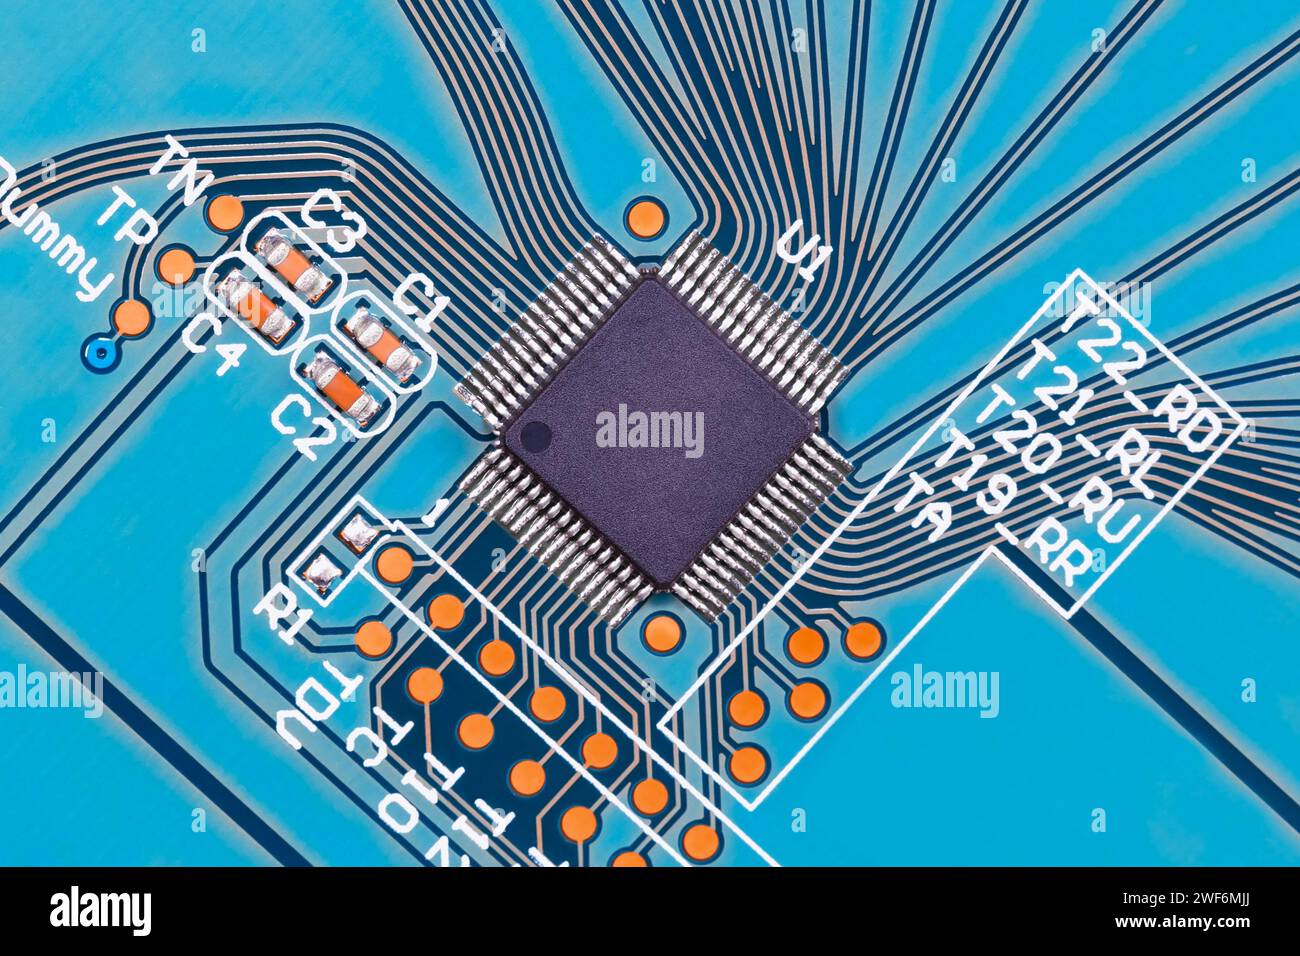 Microprocessor on a blue printed circuit board close-up, top view. Macro photography Stock Photo